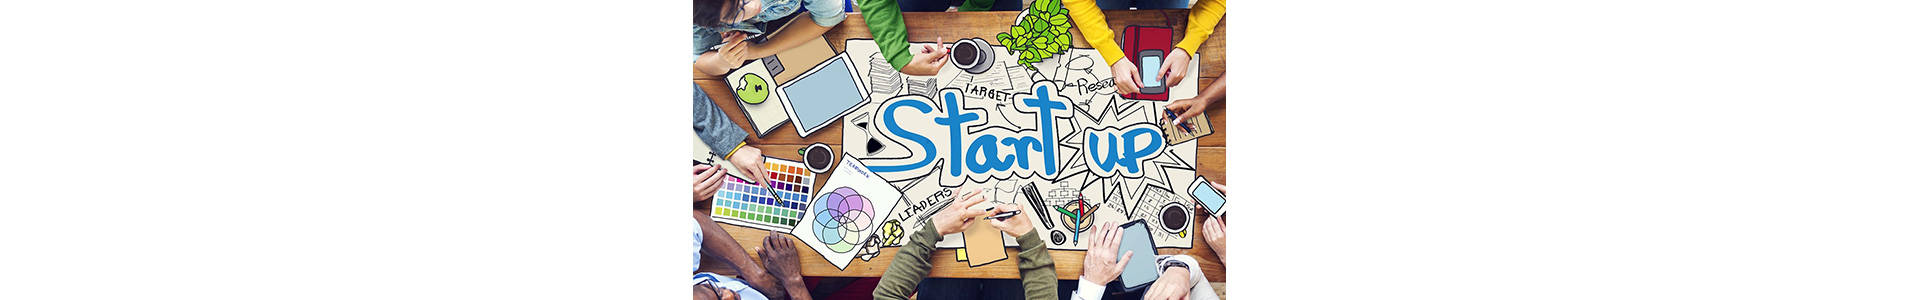 Precautions for Small Start-up｜Ways to raise funds